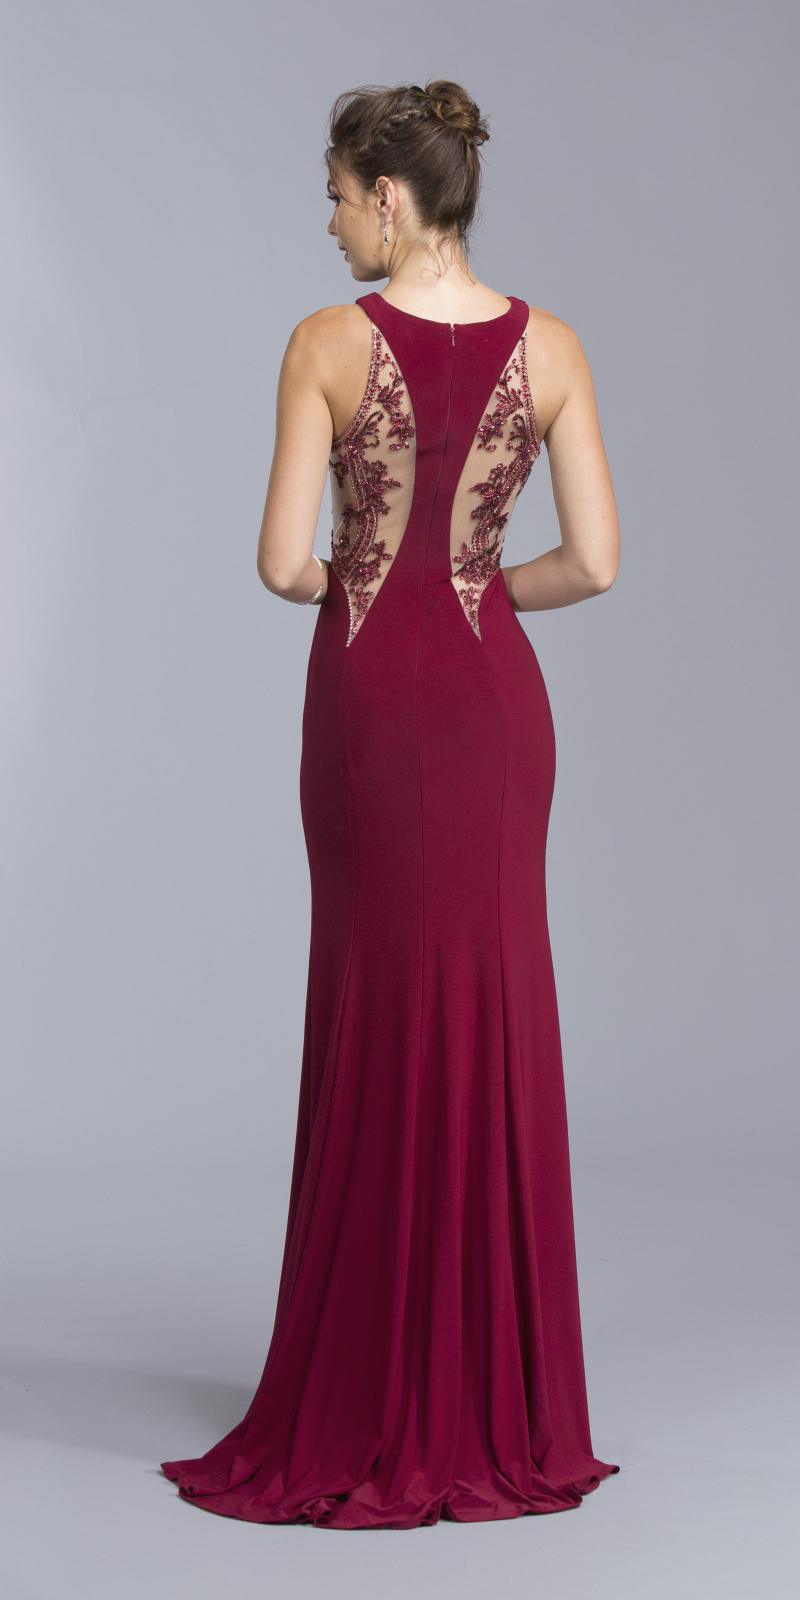 Burgundy Sleeveless Long Formal Dress with Beaded Sheer Cut-Out